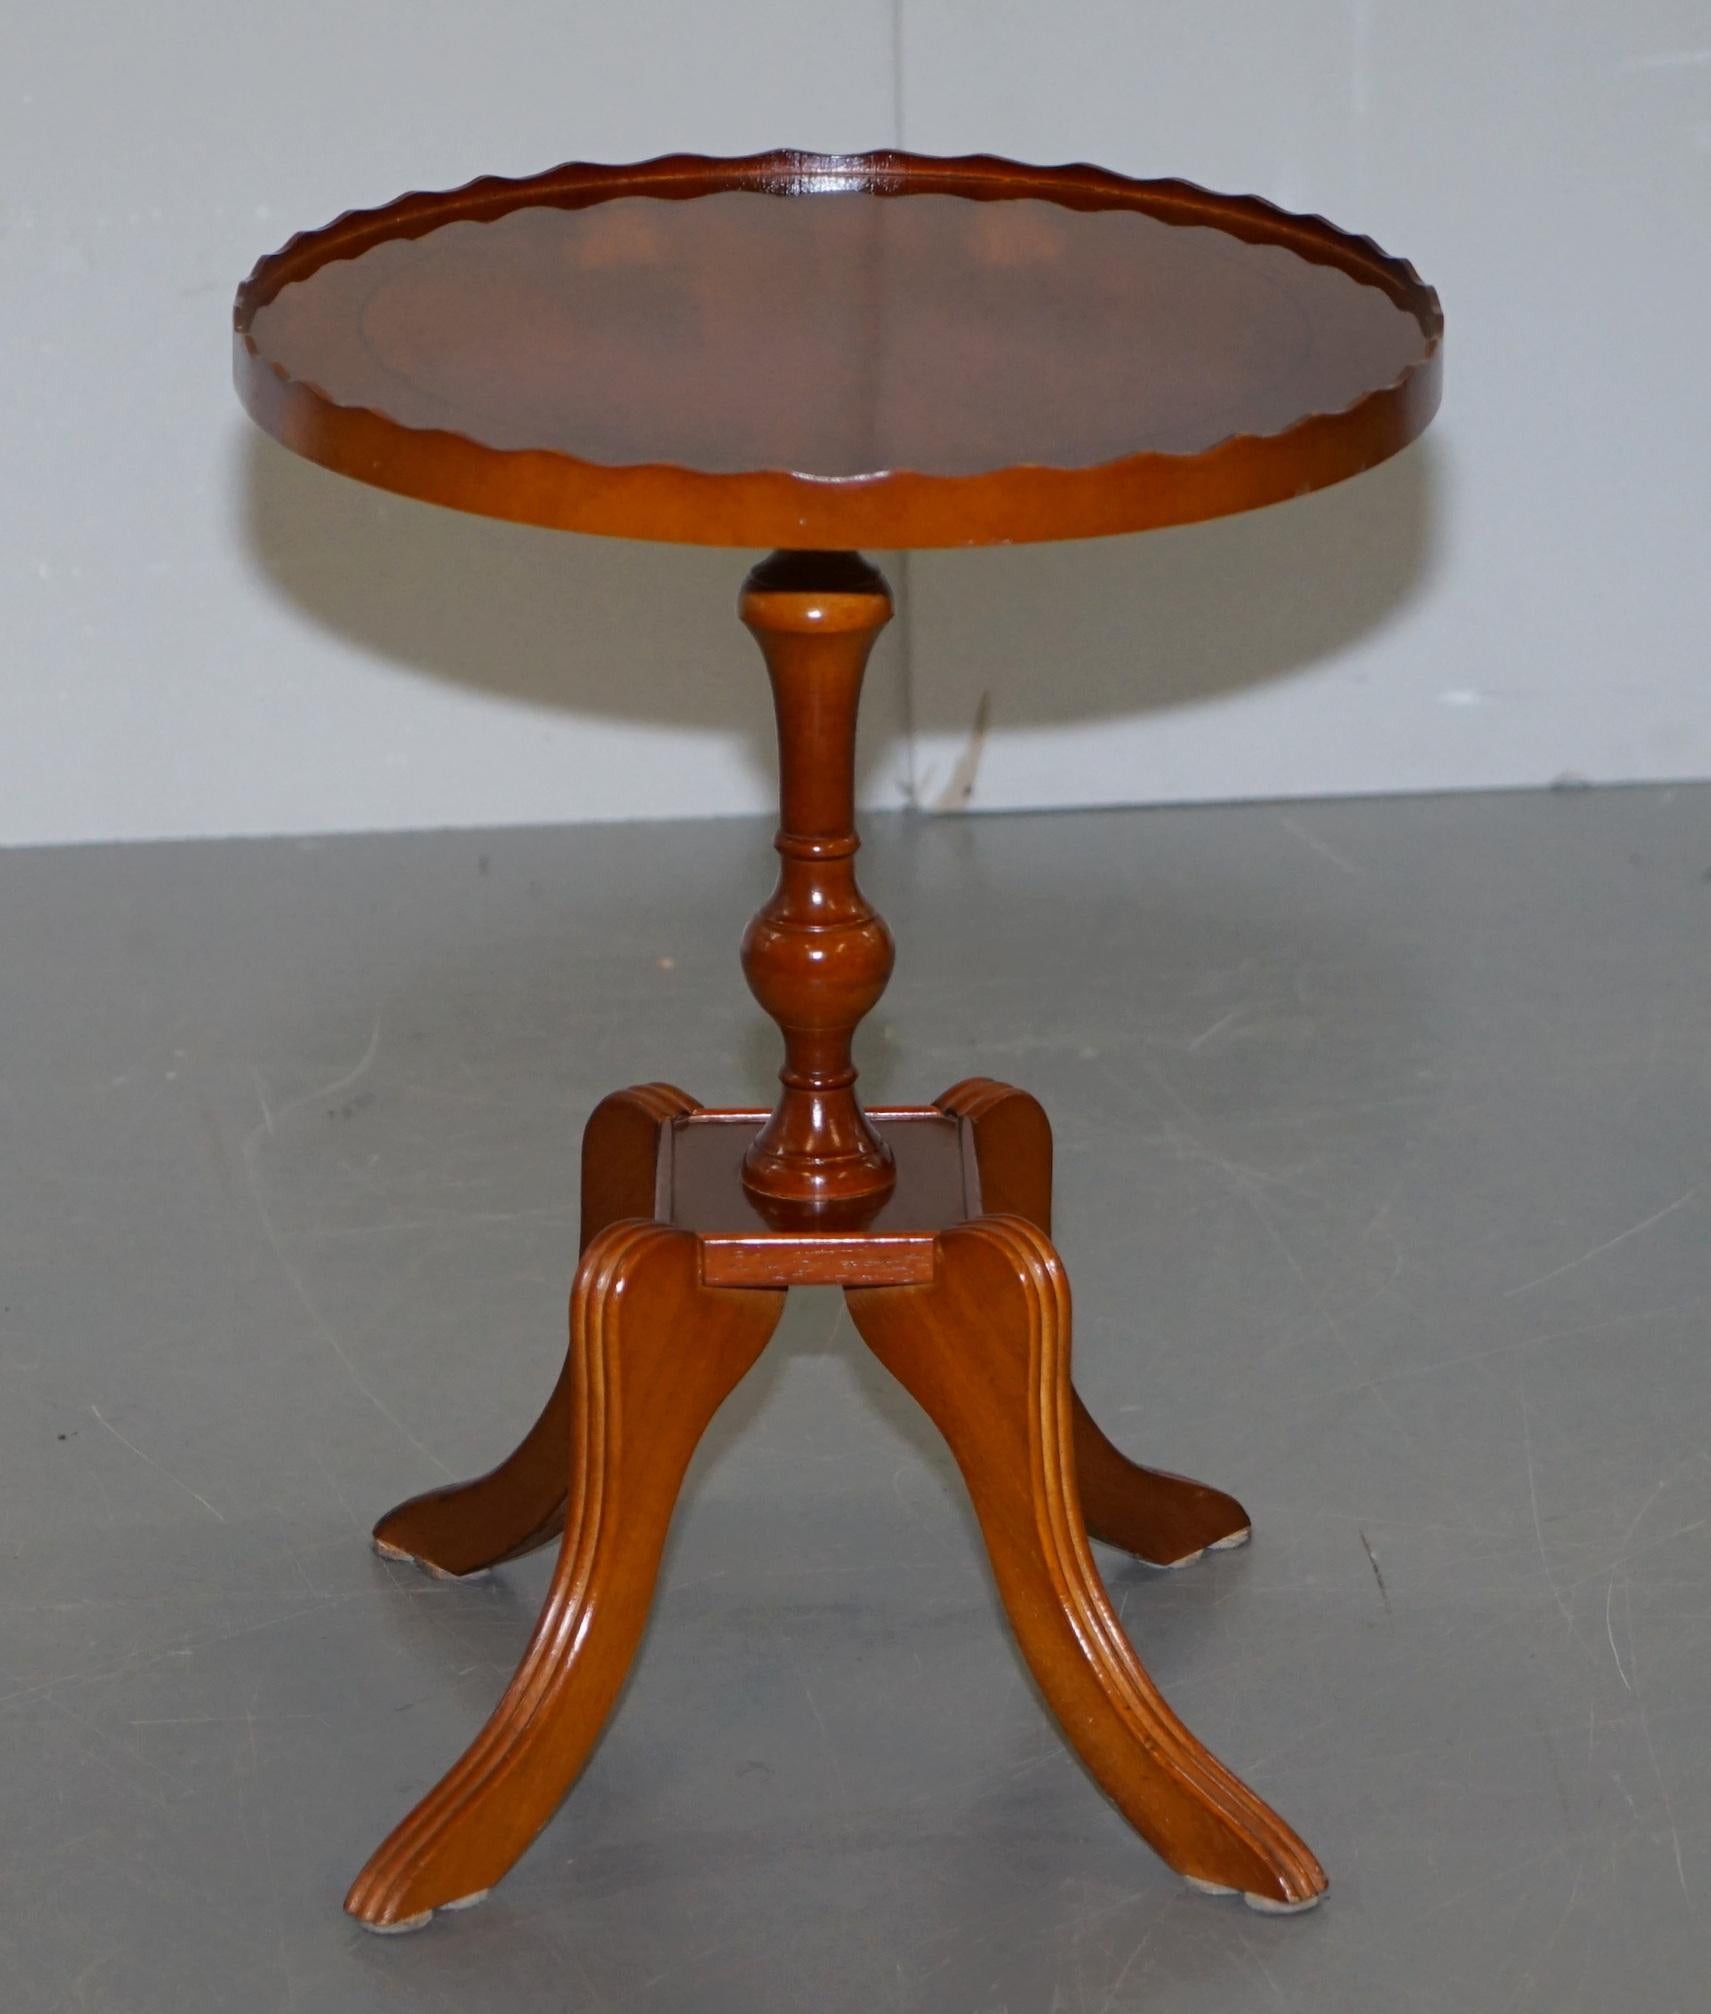 Sublime Burr Yew Wood Beresford & Hicks Side End Lamp Table with Gallery Rail For Sale 5